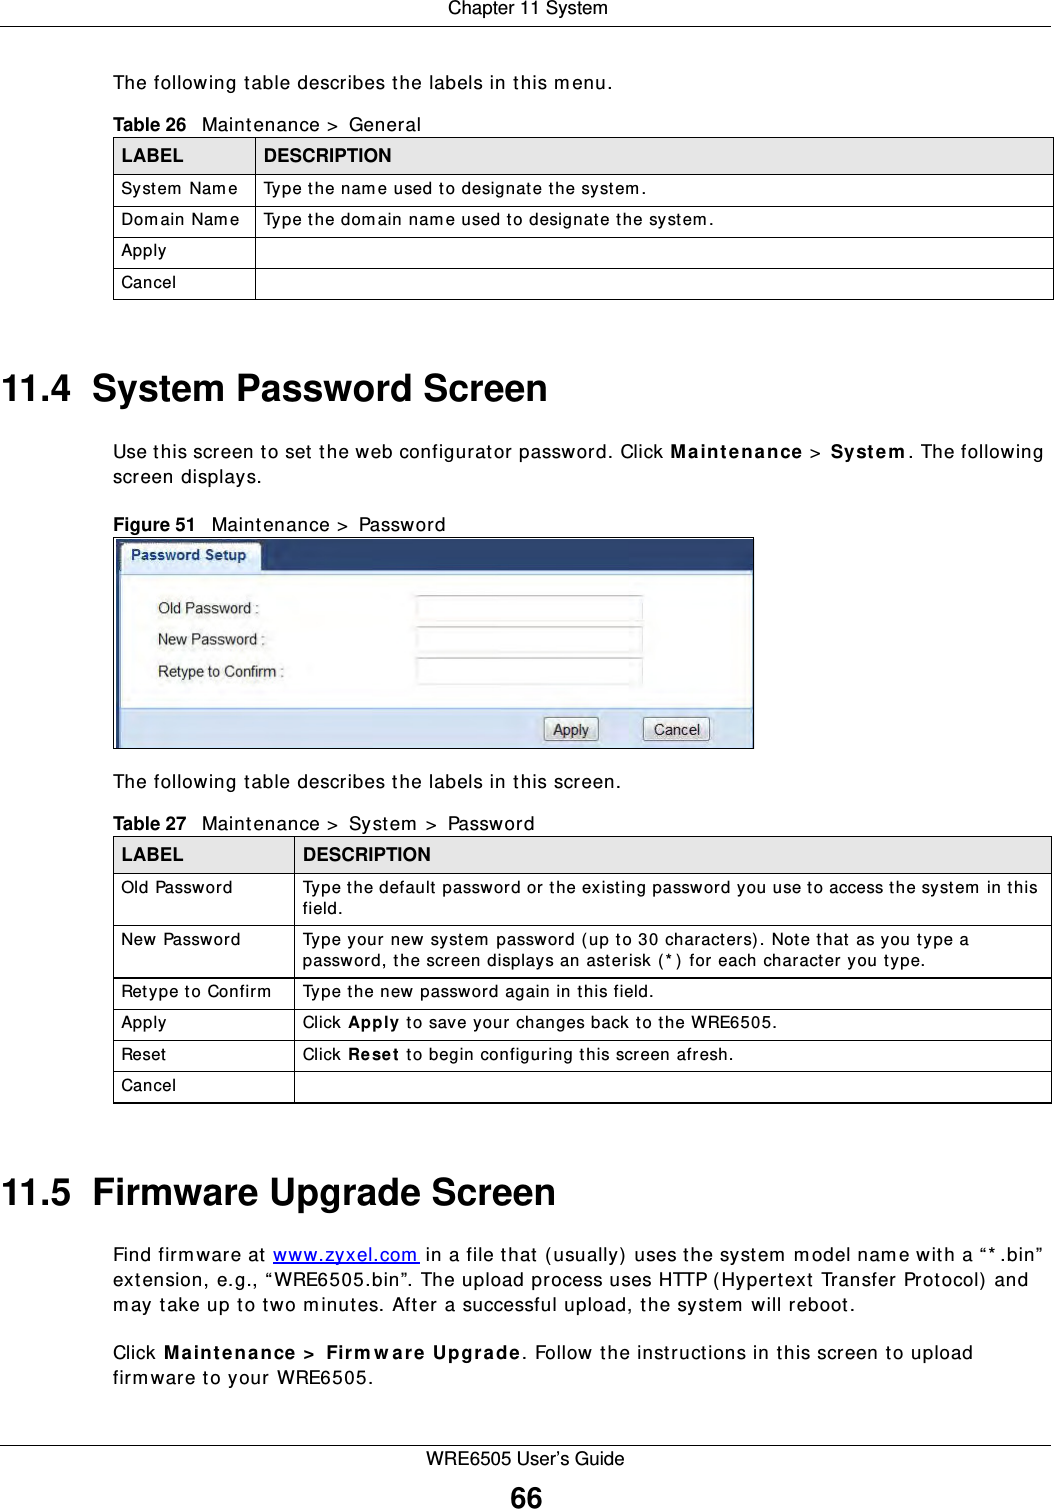  Chapter 11 SystemWRE6505 User’s Guide66The following table describes the labels in this m enu.11.4  System Password Screen Use this screen to set the web configurator password. Click M a int e na nce  &gt;  Sy st e m . The following screen displays.Figure 51   Maintenance &gt;  Password The following table describes the labels in this screen.11.5  Firmware Upgrade ScreenFind firm ware at www.zyxel.com  in a file that (usually) uses the system m odel name with a “* .bin” extension, e.g., “WRE6505.bin”. The upload process uses HTTP (Hypertext Transfer Protocol) and may take up to two m inutes. After a successful upload, the system will reboot.Click M a inten ance &gt;  Firm w a r e Upgr a de . Follow the instructions in this screen to upload firmware to your WRE6505.Table 26   Maintenance &gt;  GeneralLABEL DESCRIPTIONSystem  Name Type the name used to designate the system.Dom ain Nam e Type the dom ain nam e used to designate the system.ApplyCancelTable 27   Maintenance &gt;  System  &gt;  PasswordLABEL DESCRIPTIONOld Password Type the default password or the existing password you use to access the system  in this field.New Password Type your new system password ( up to 30 characters). Note that as you type a password, the screen displays an asterisk (* ) for each character you type.Retype to Confirm Type the new password again in this field.Apply Click Apply  to save your changes back to the WRE6505.Reset Click Re se t  to begin configuring this screen afresh.Cancel